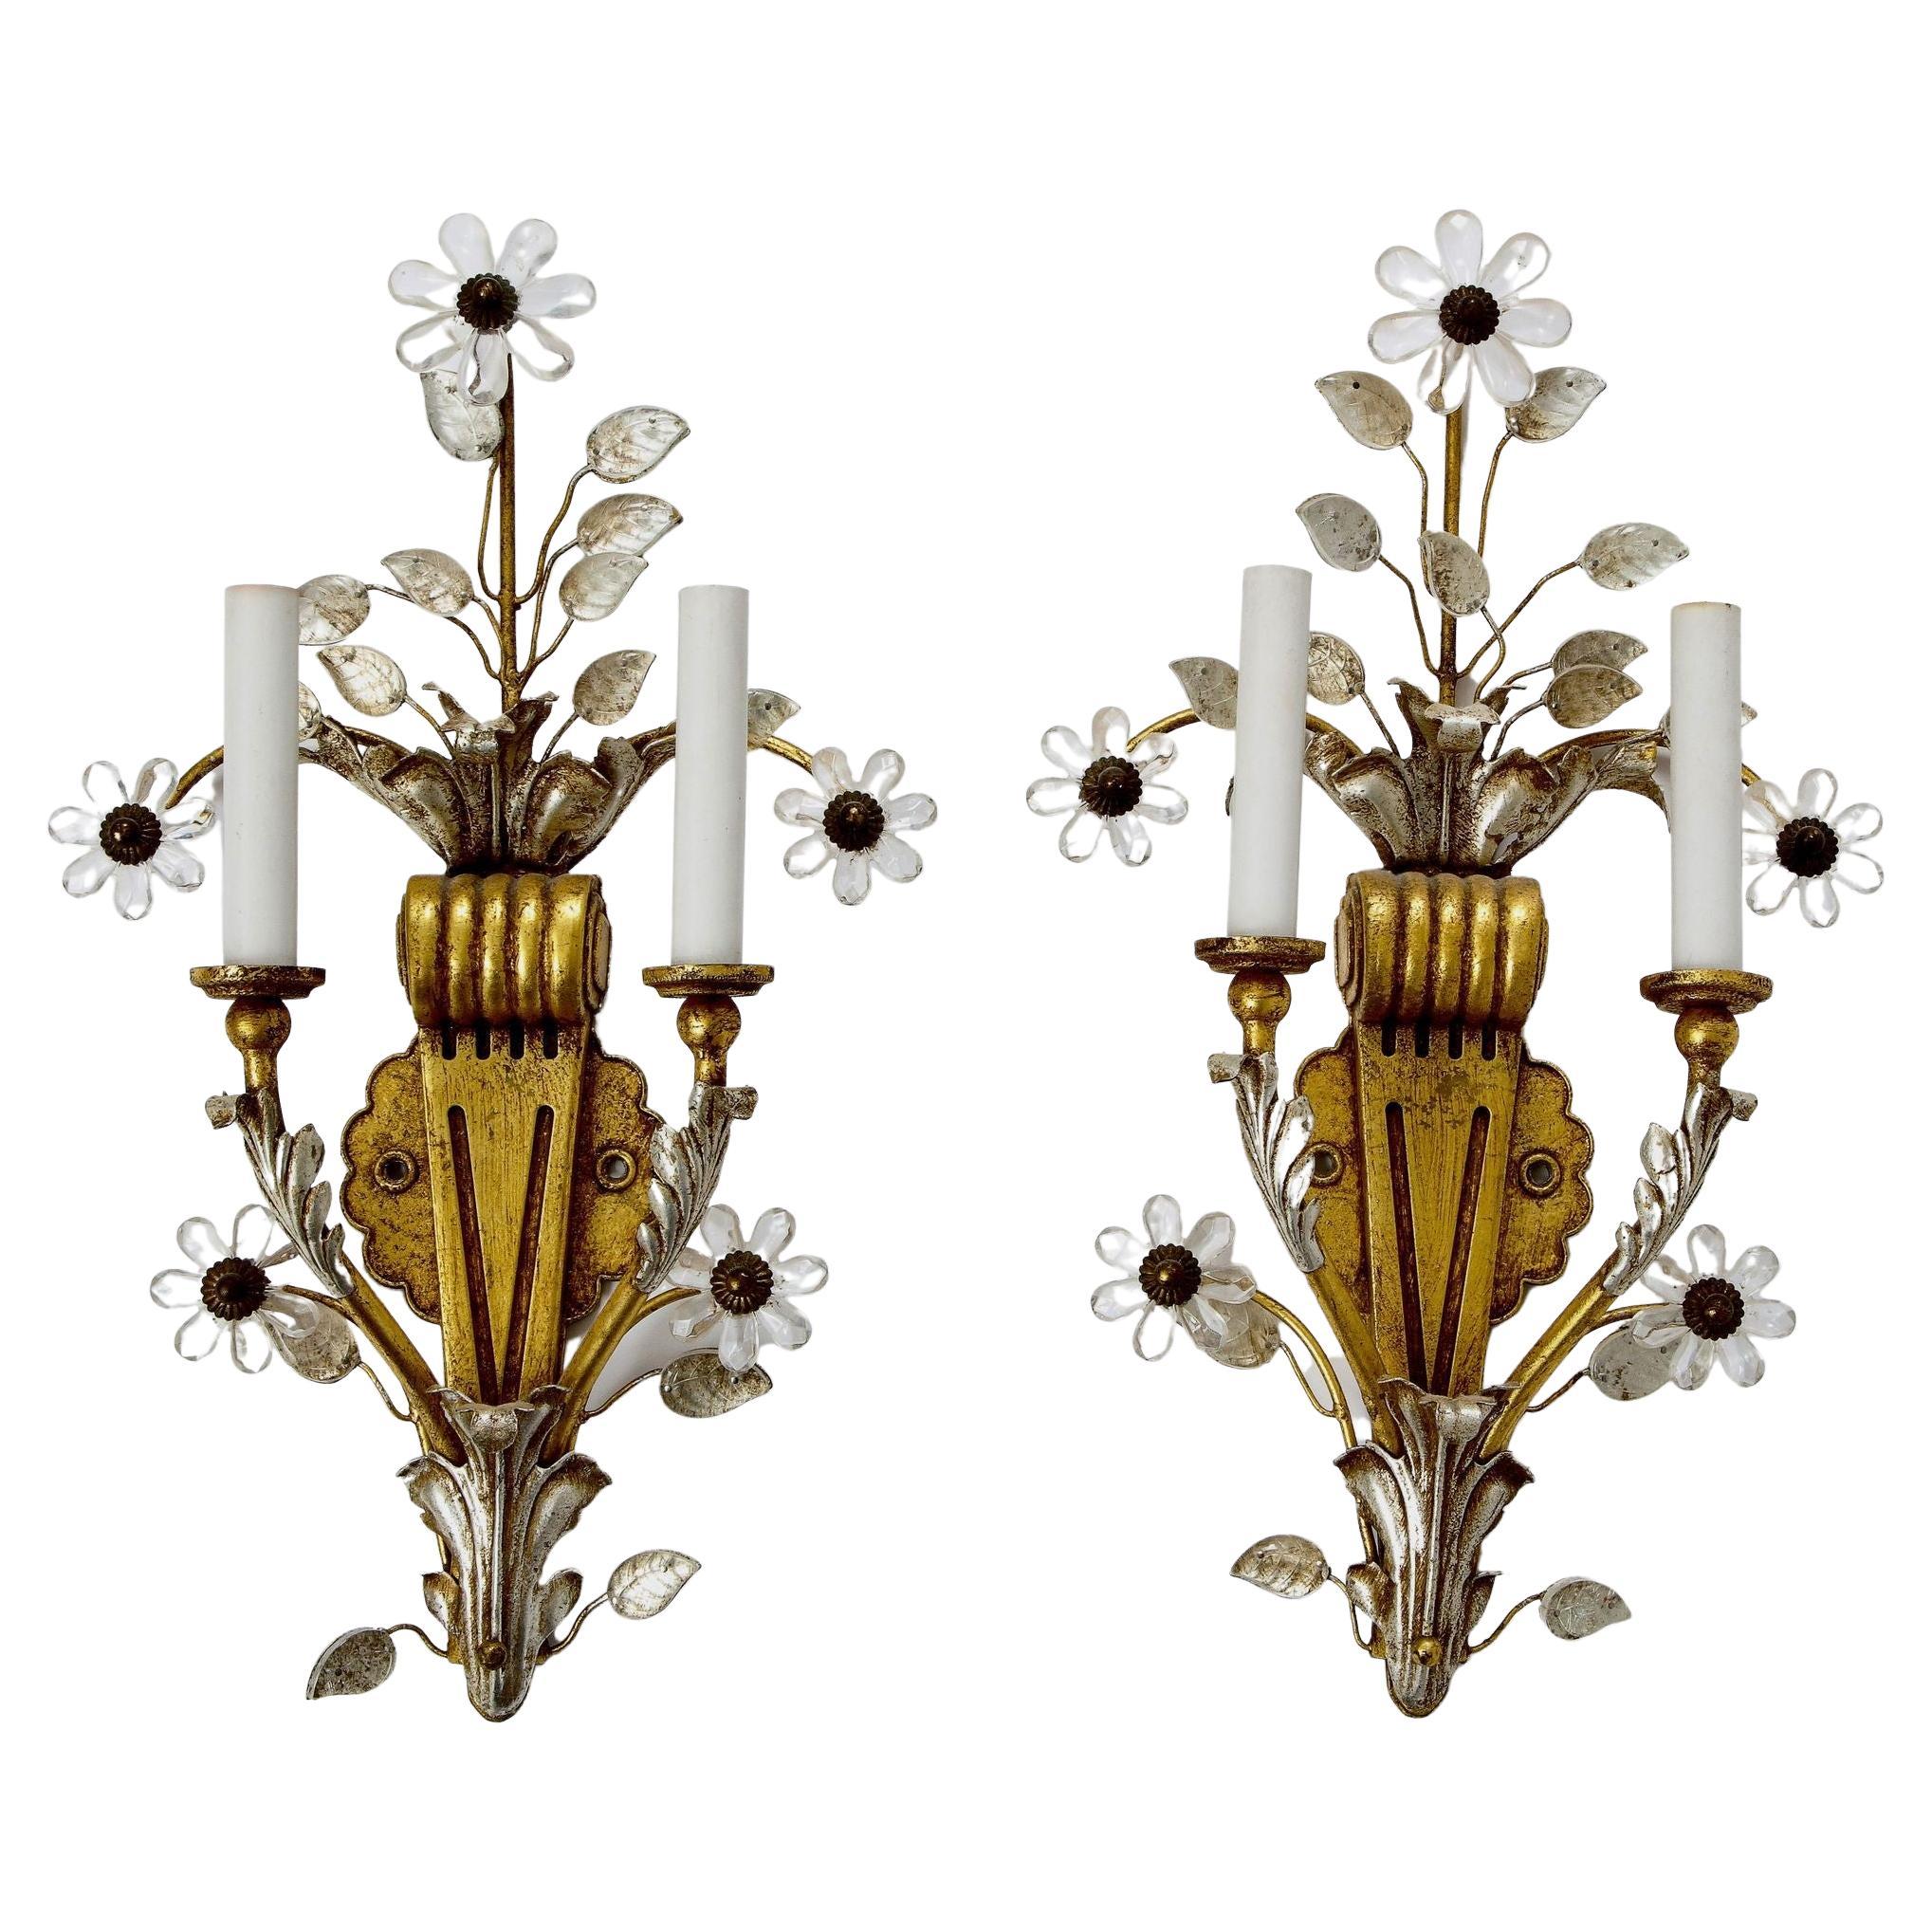 Pair of Gilt and Silvered Rock Crystal Floral Motif Sconces By Banci